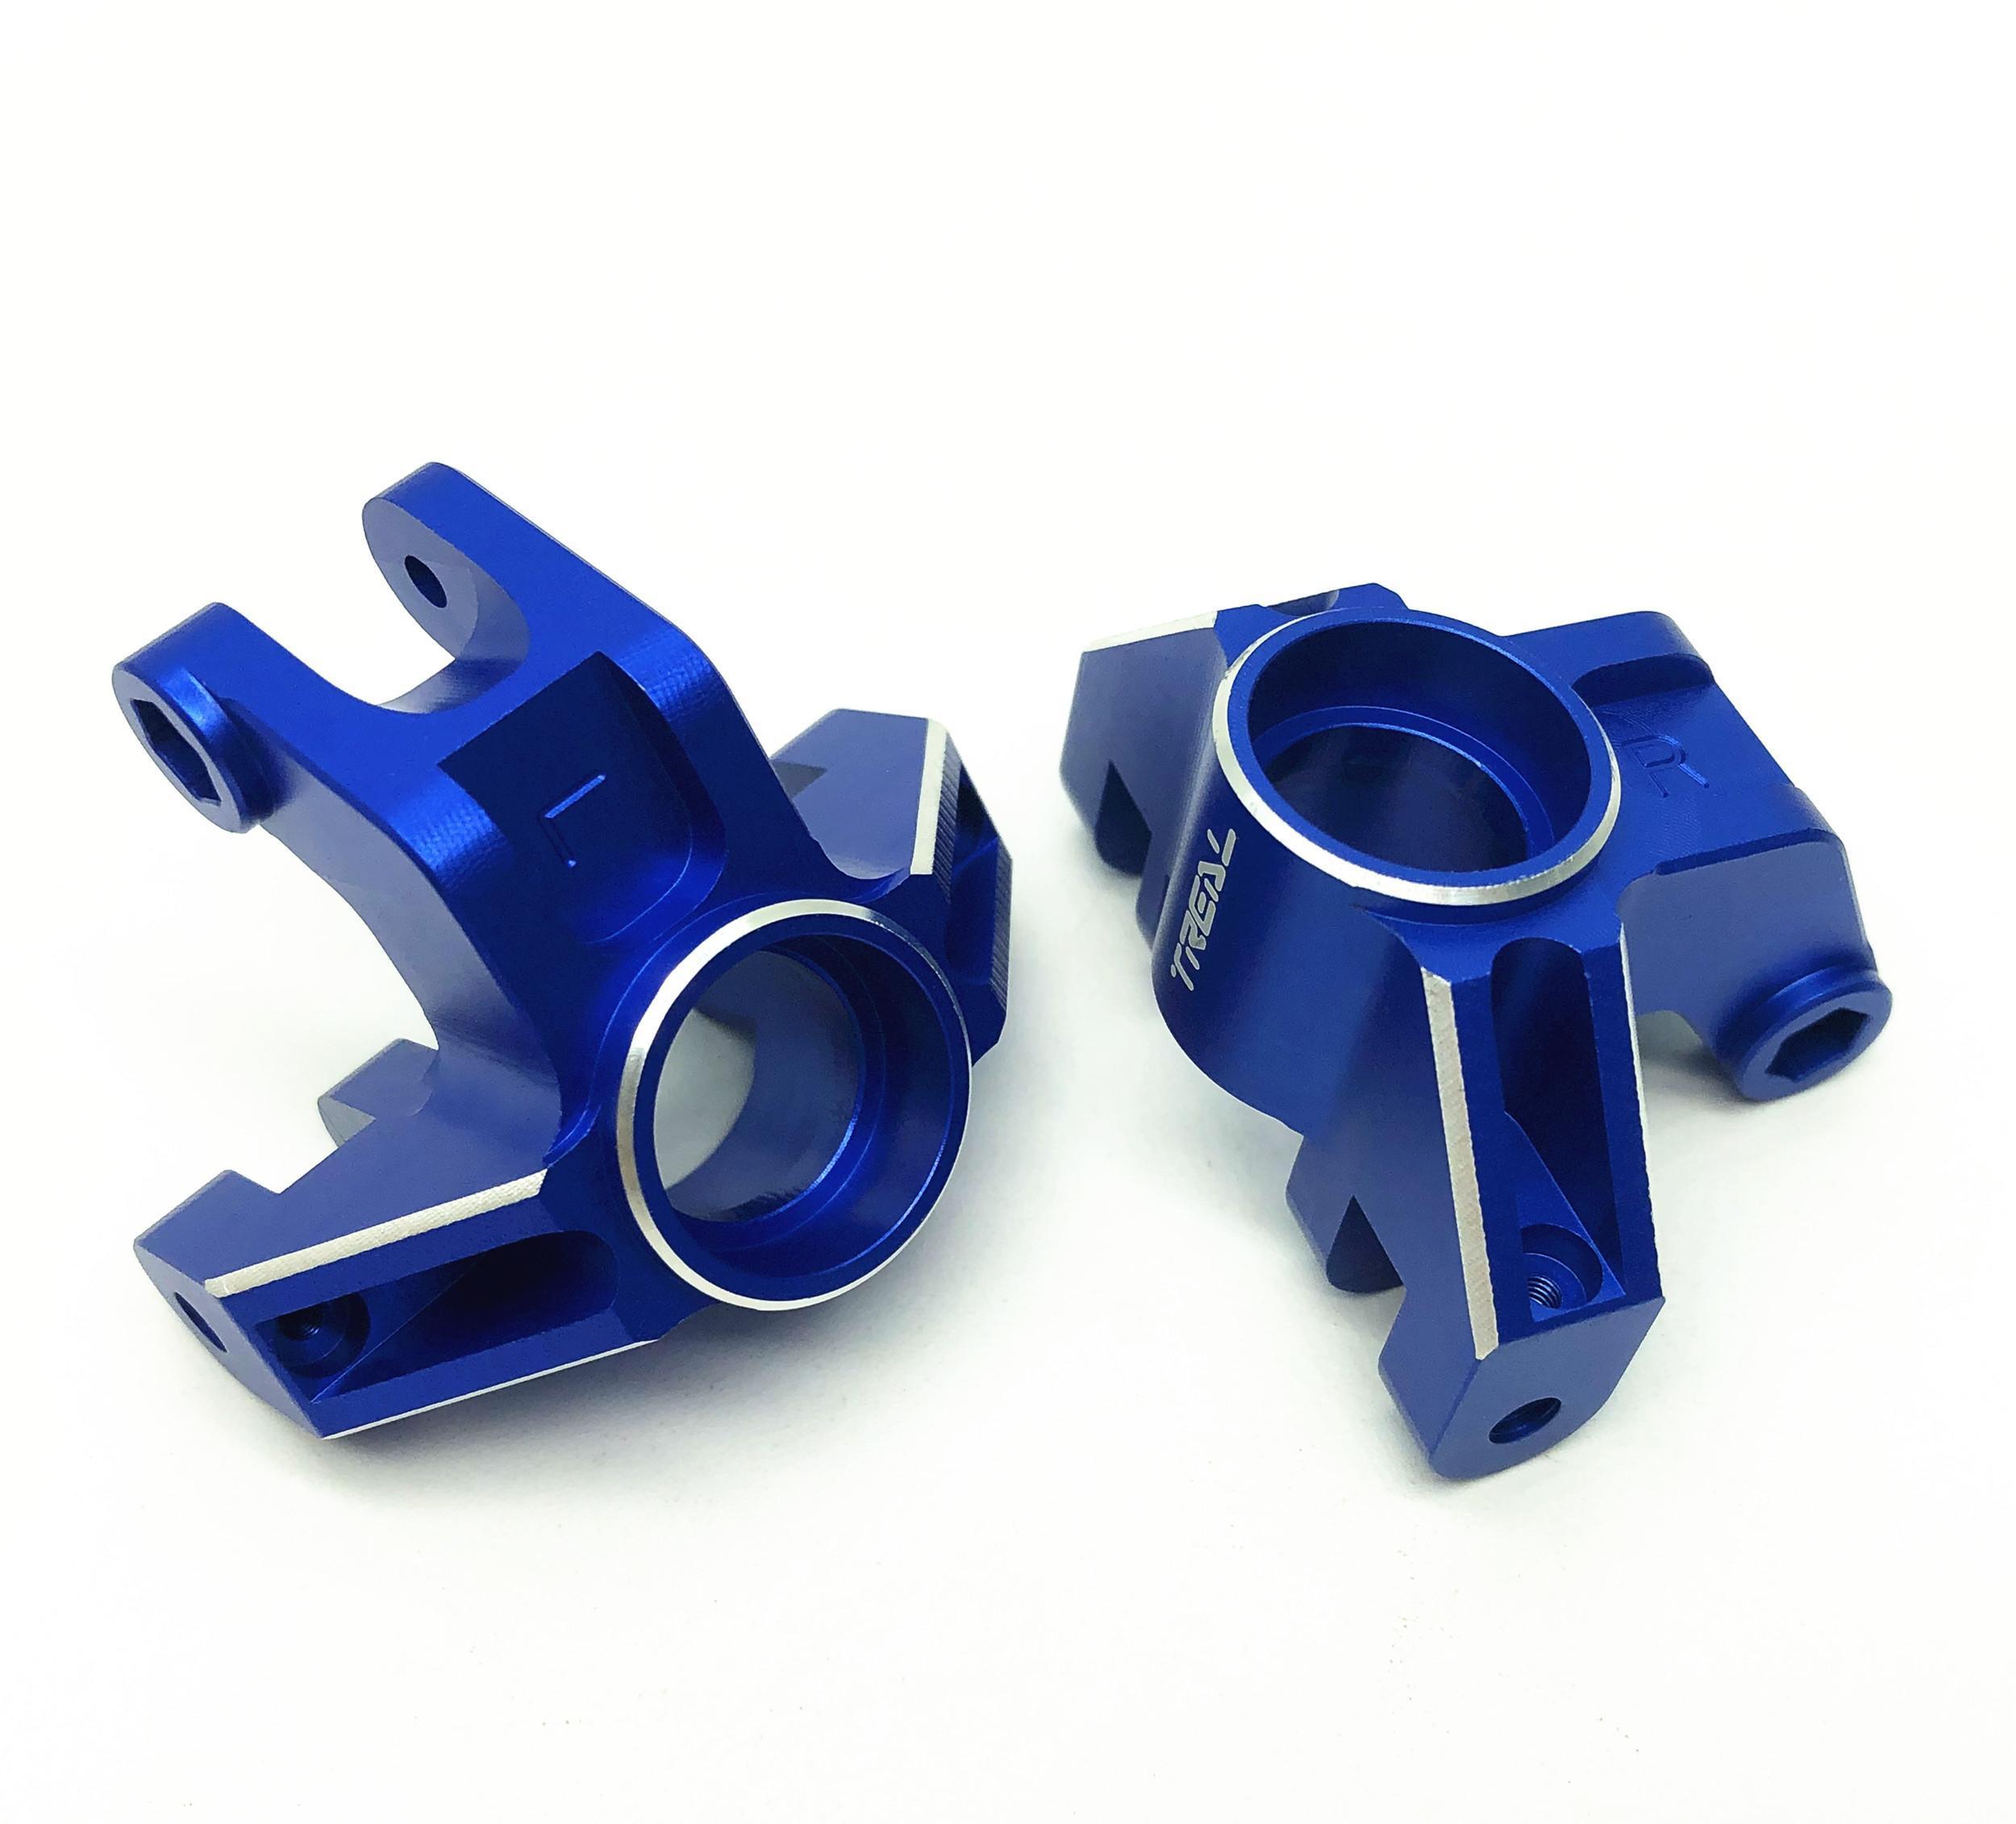 Treal Aluminum 7075 Front Steering Knuckels for Losi LMT (Blue) ...